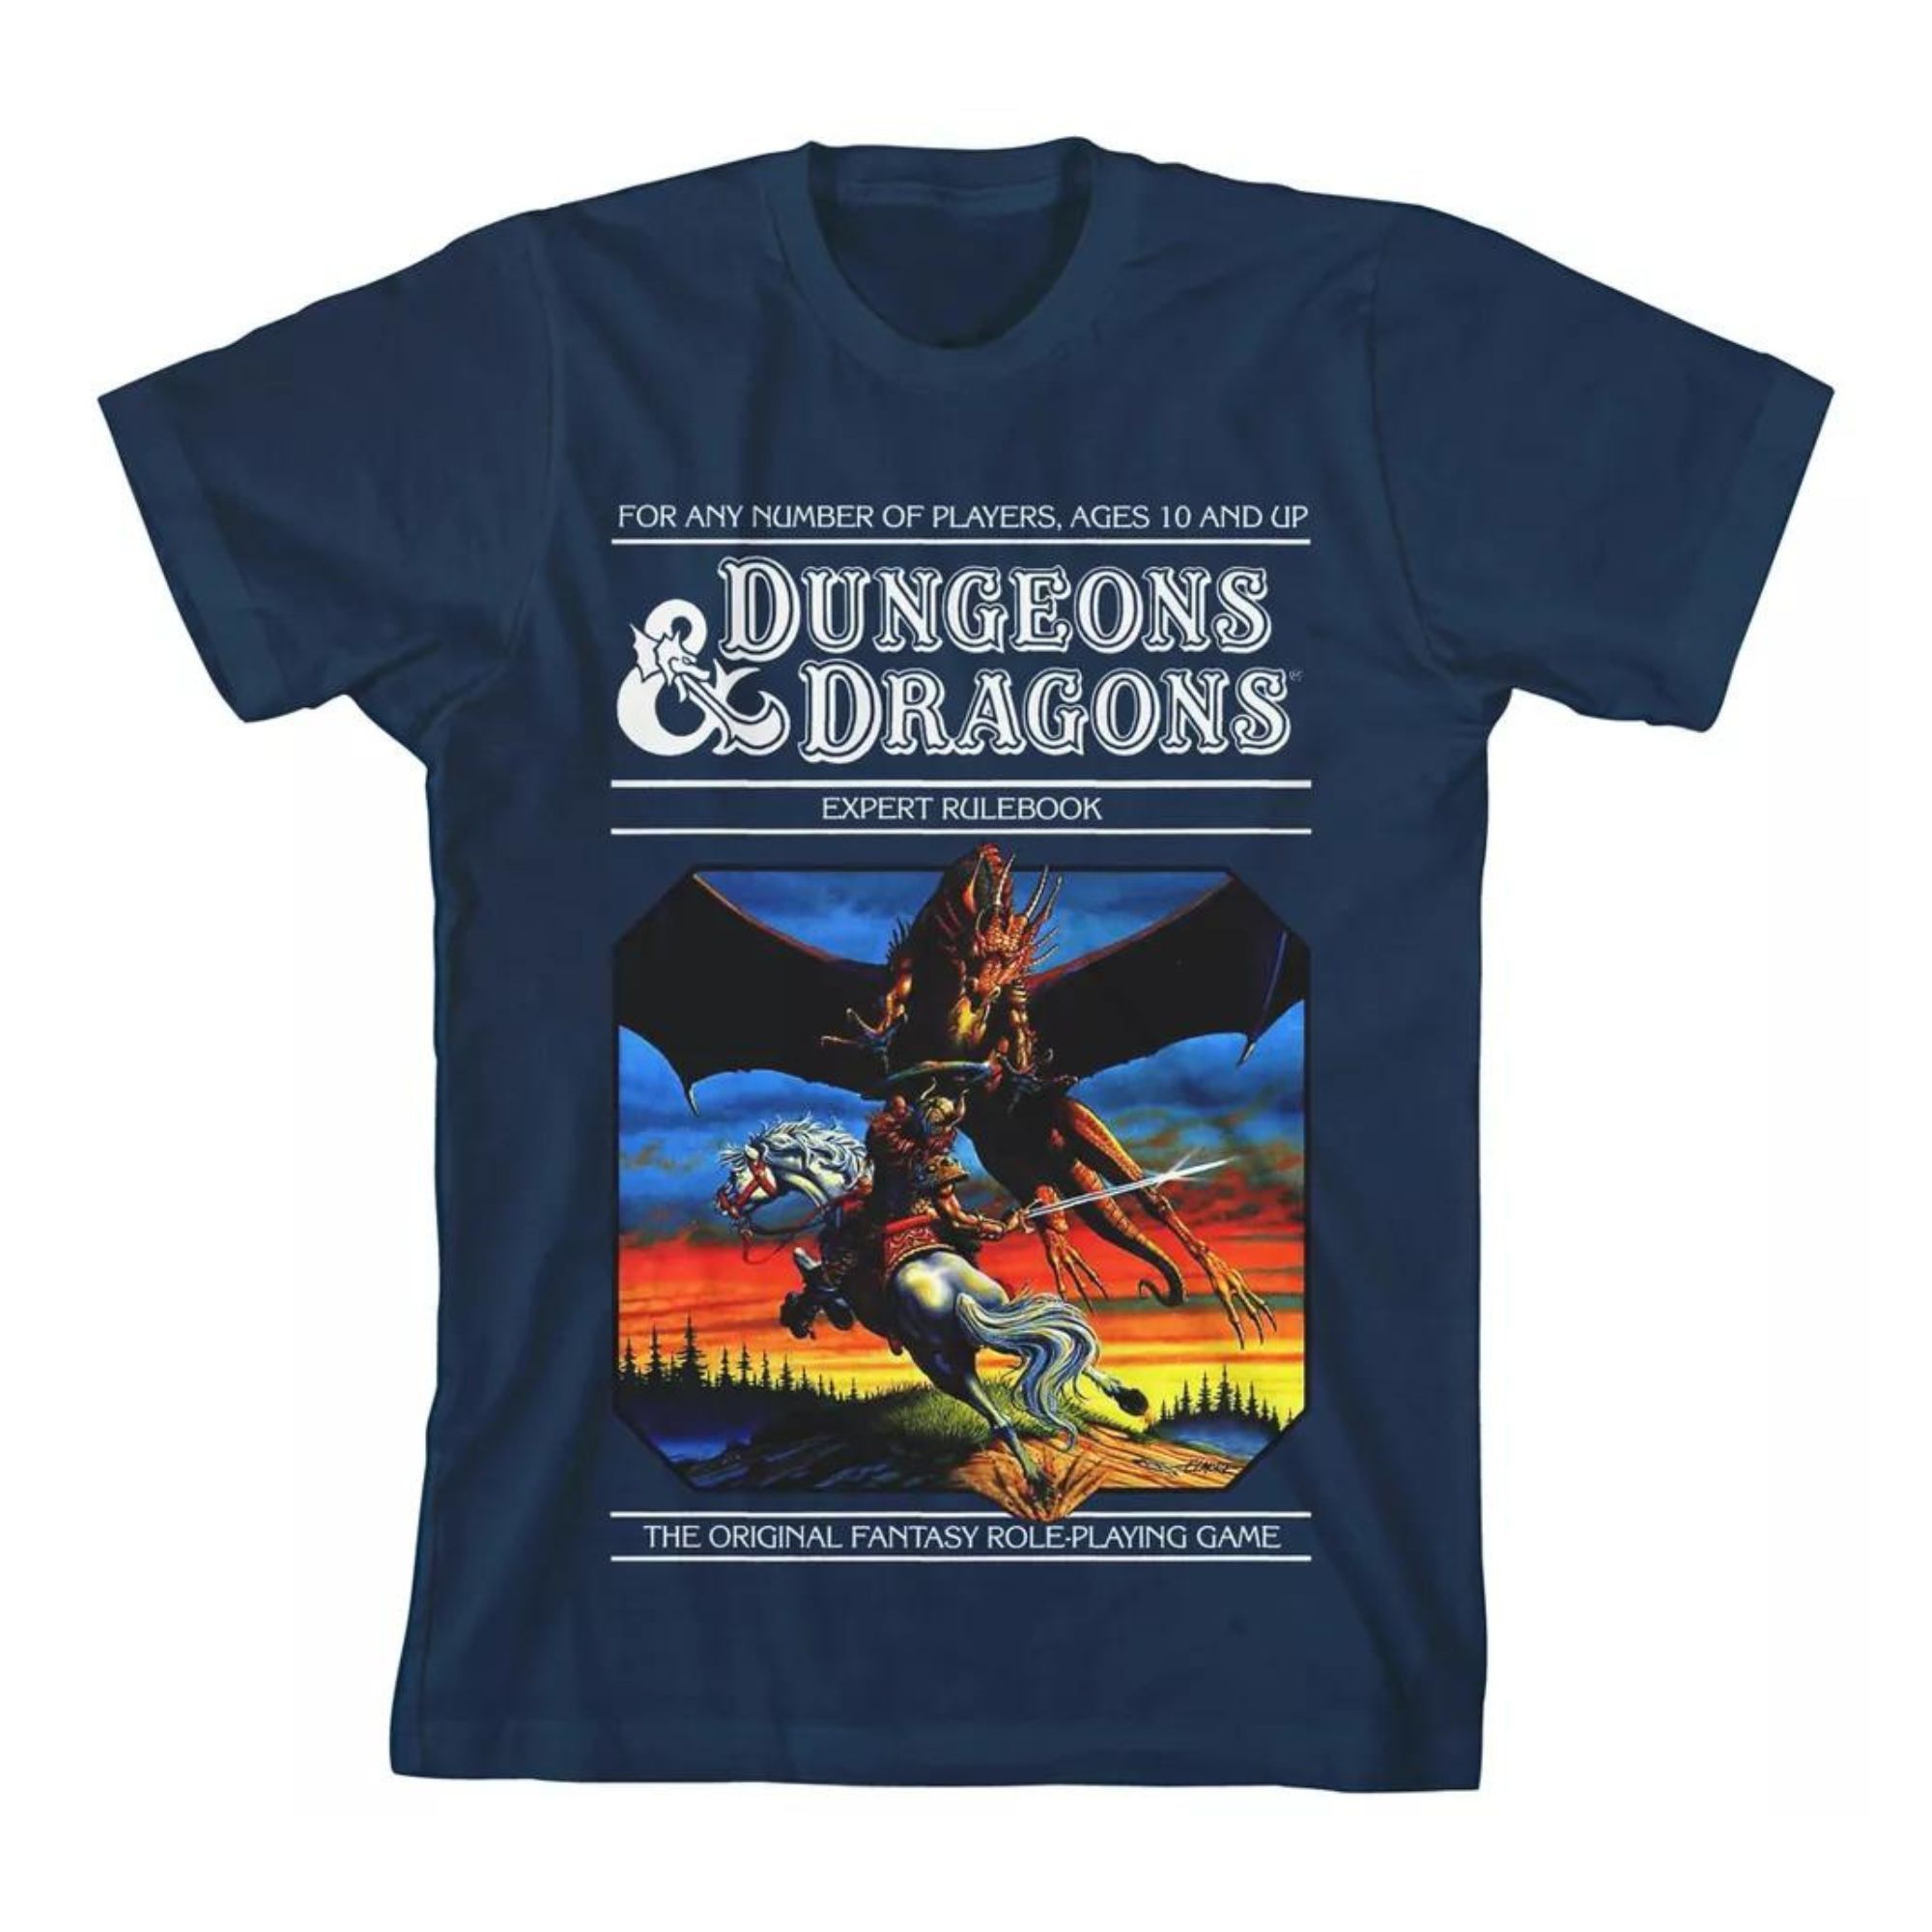 Product still of the Dungeons & Dragons Cover Graphic T-Shirt on a white background